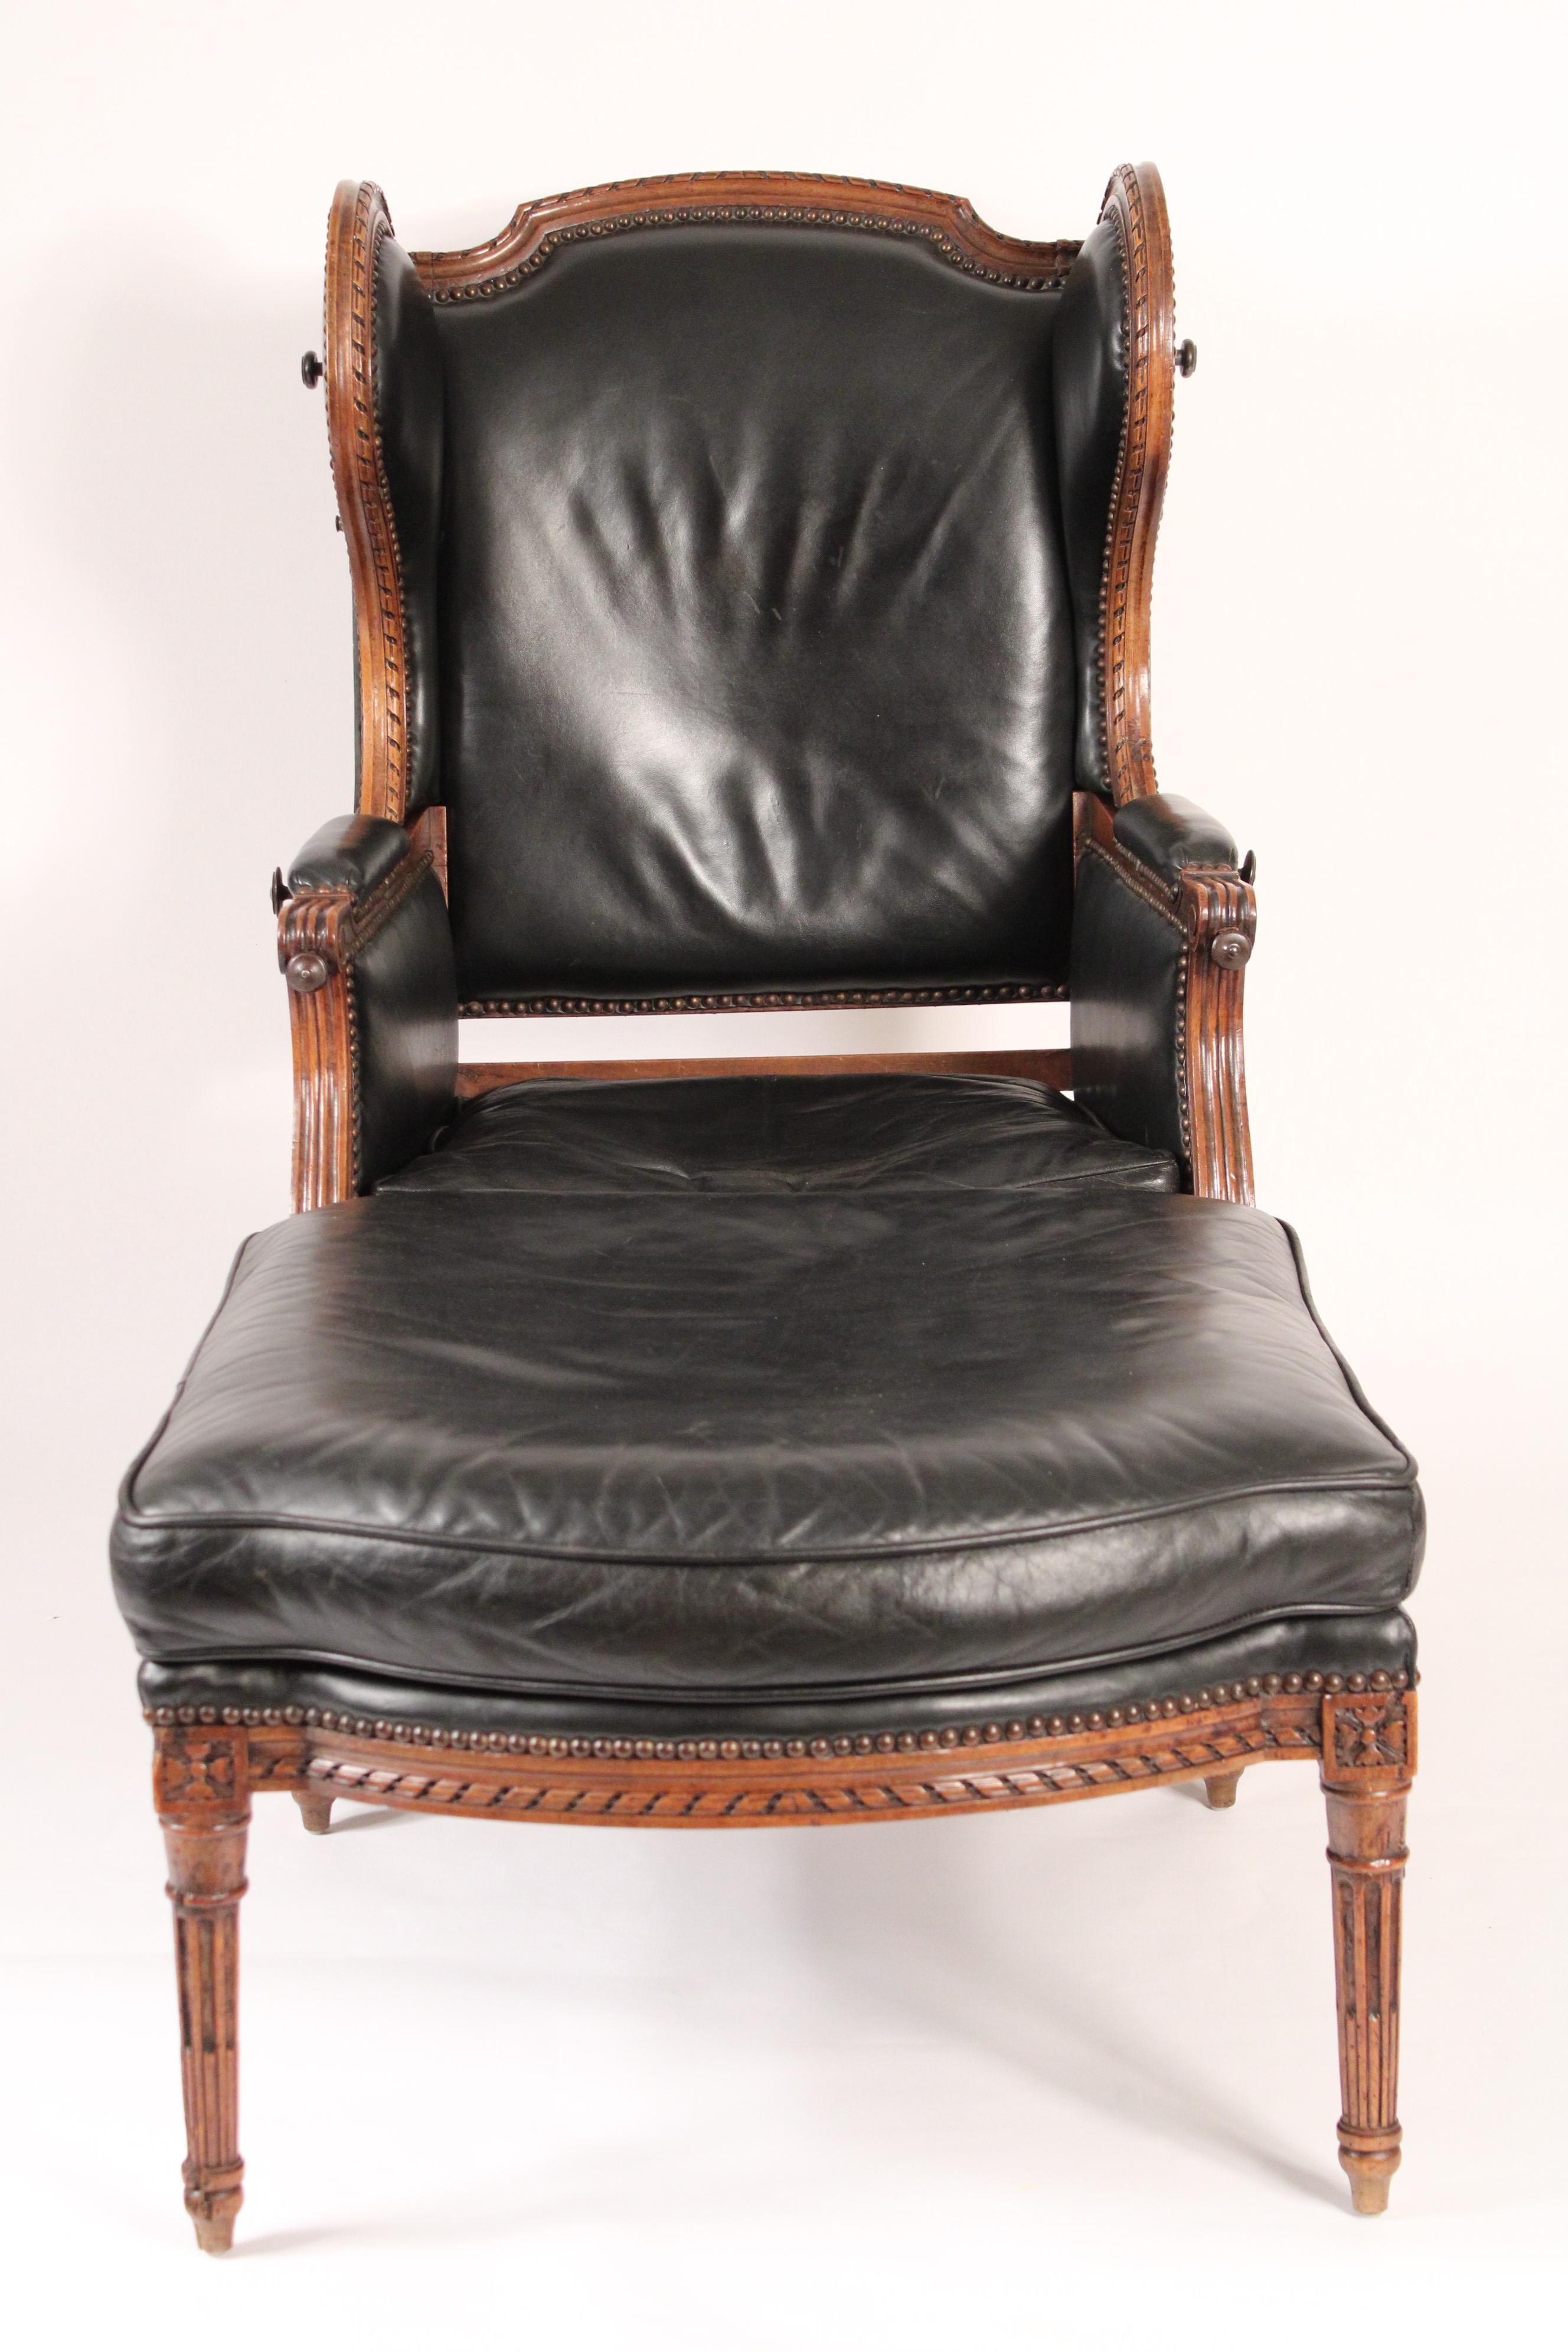 Antique Louis XVI style carved walnut ducheese brisee with leather upholstery, 19th century. 
The winged bergere with an adjustable back and iron tray supports that come out of the front of the arms. Dimensions of the bergere, height 46